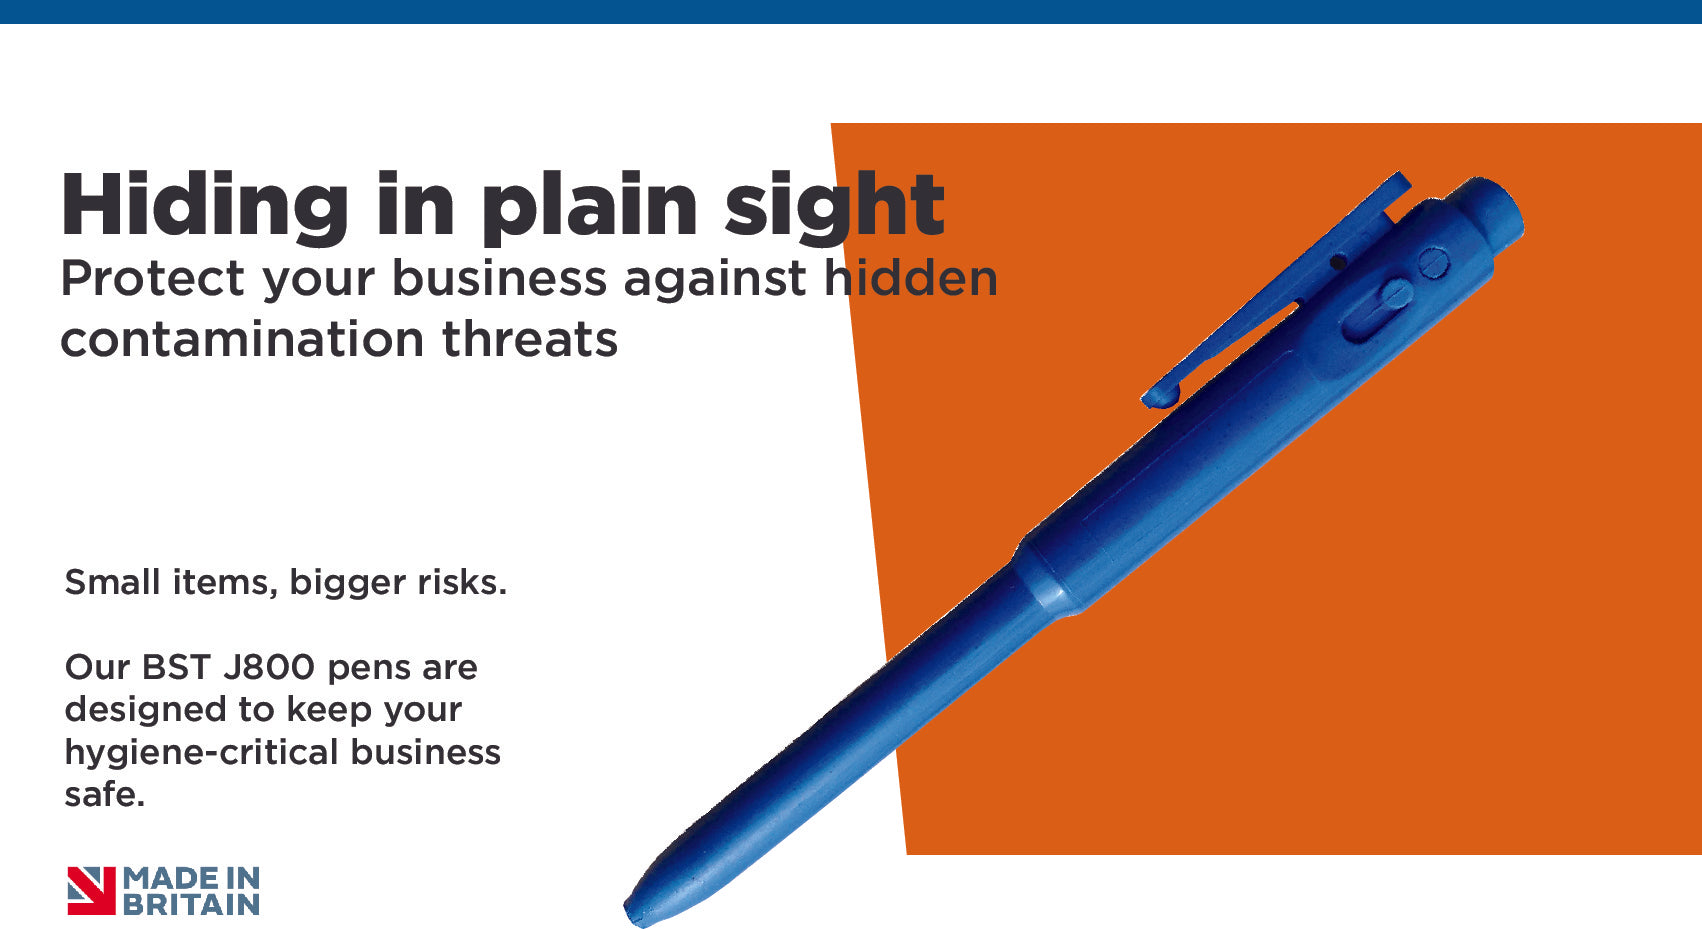 Hiding in plain sight - Protecting your business against hidden contamination threats